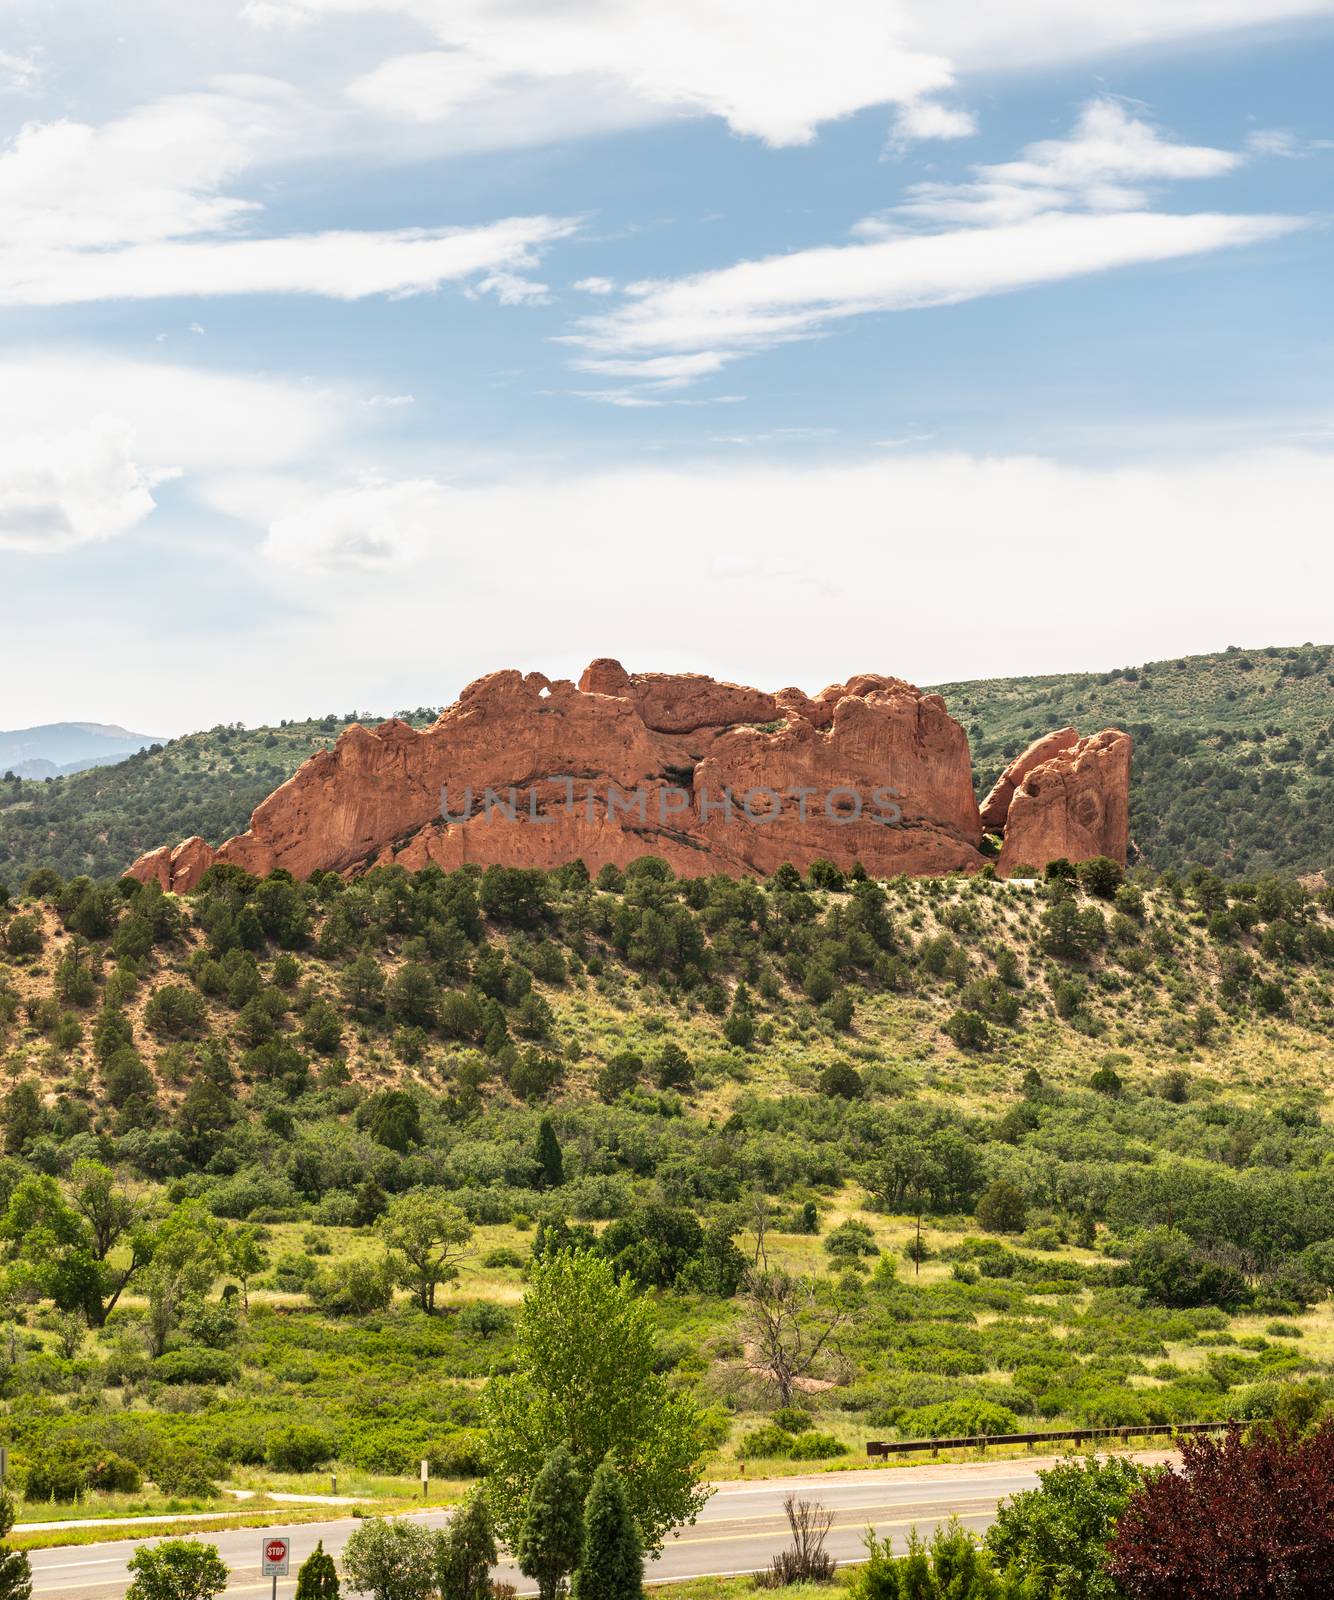 North Gateway Rock in the Garden of the Gods, Colorado by Njean